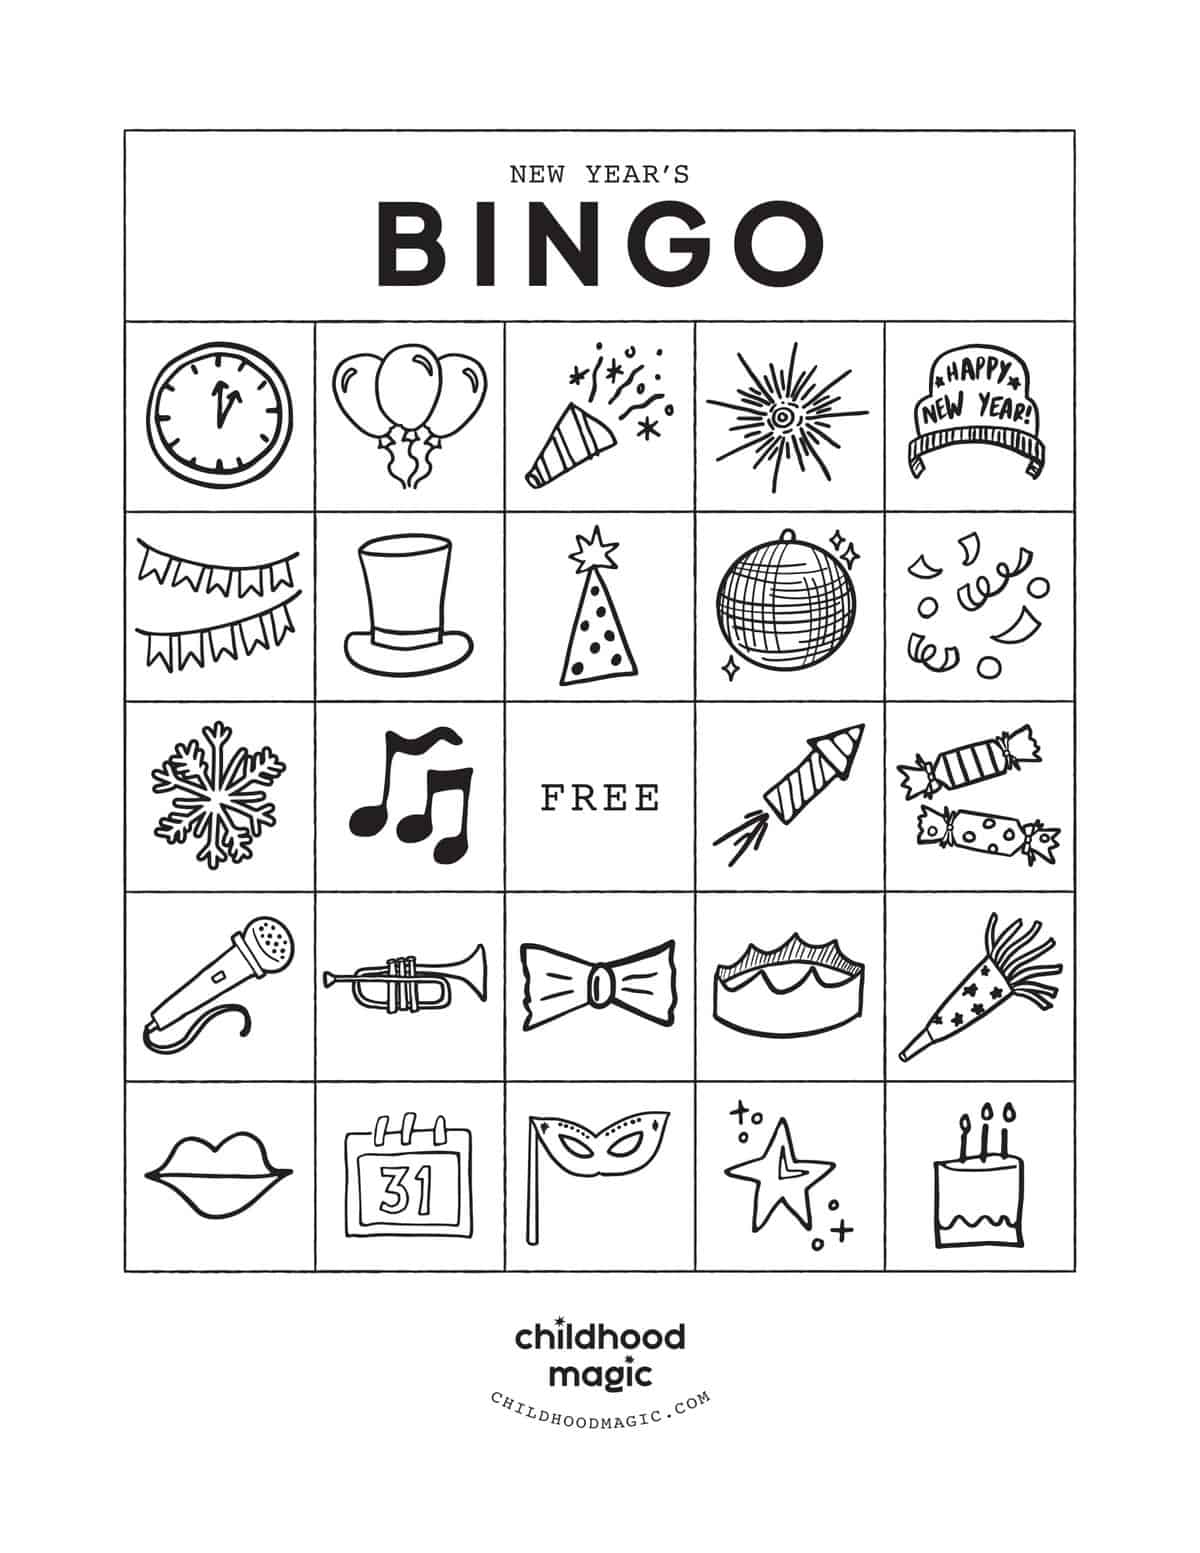 New Years themed bingo card in black and white. .